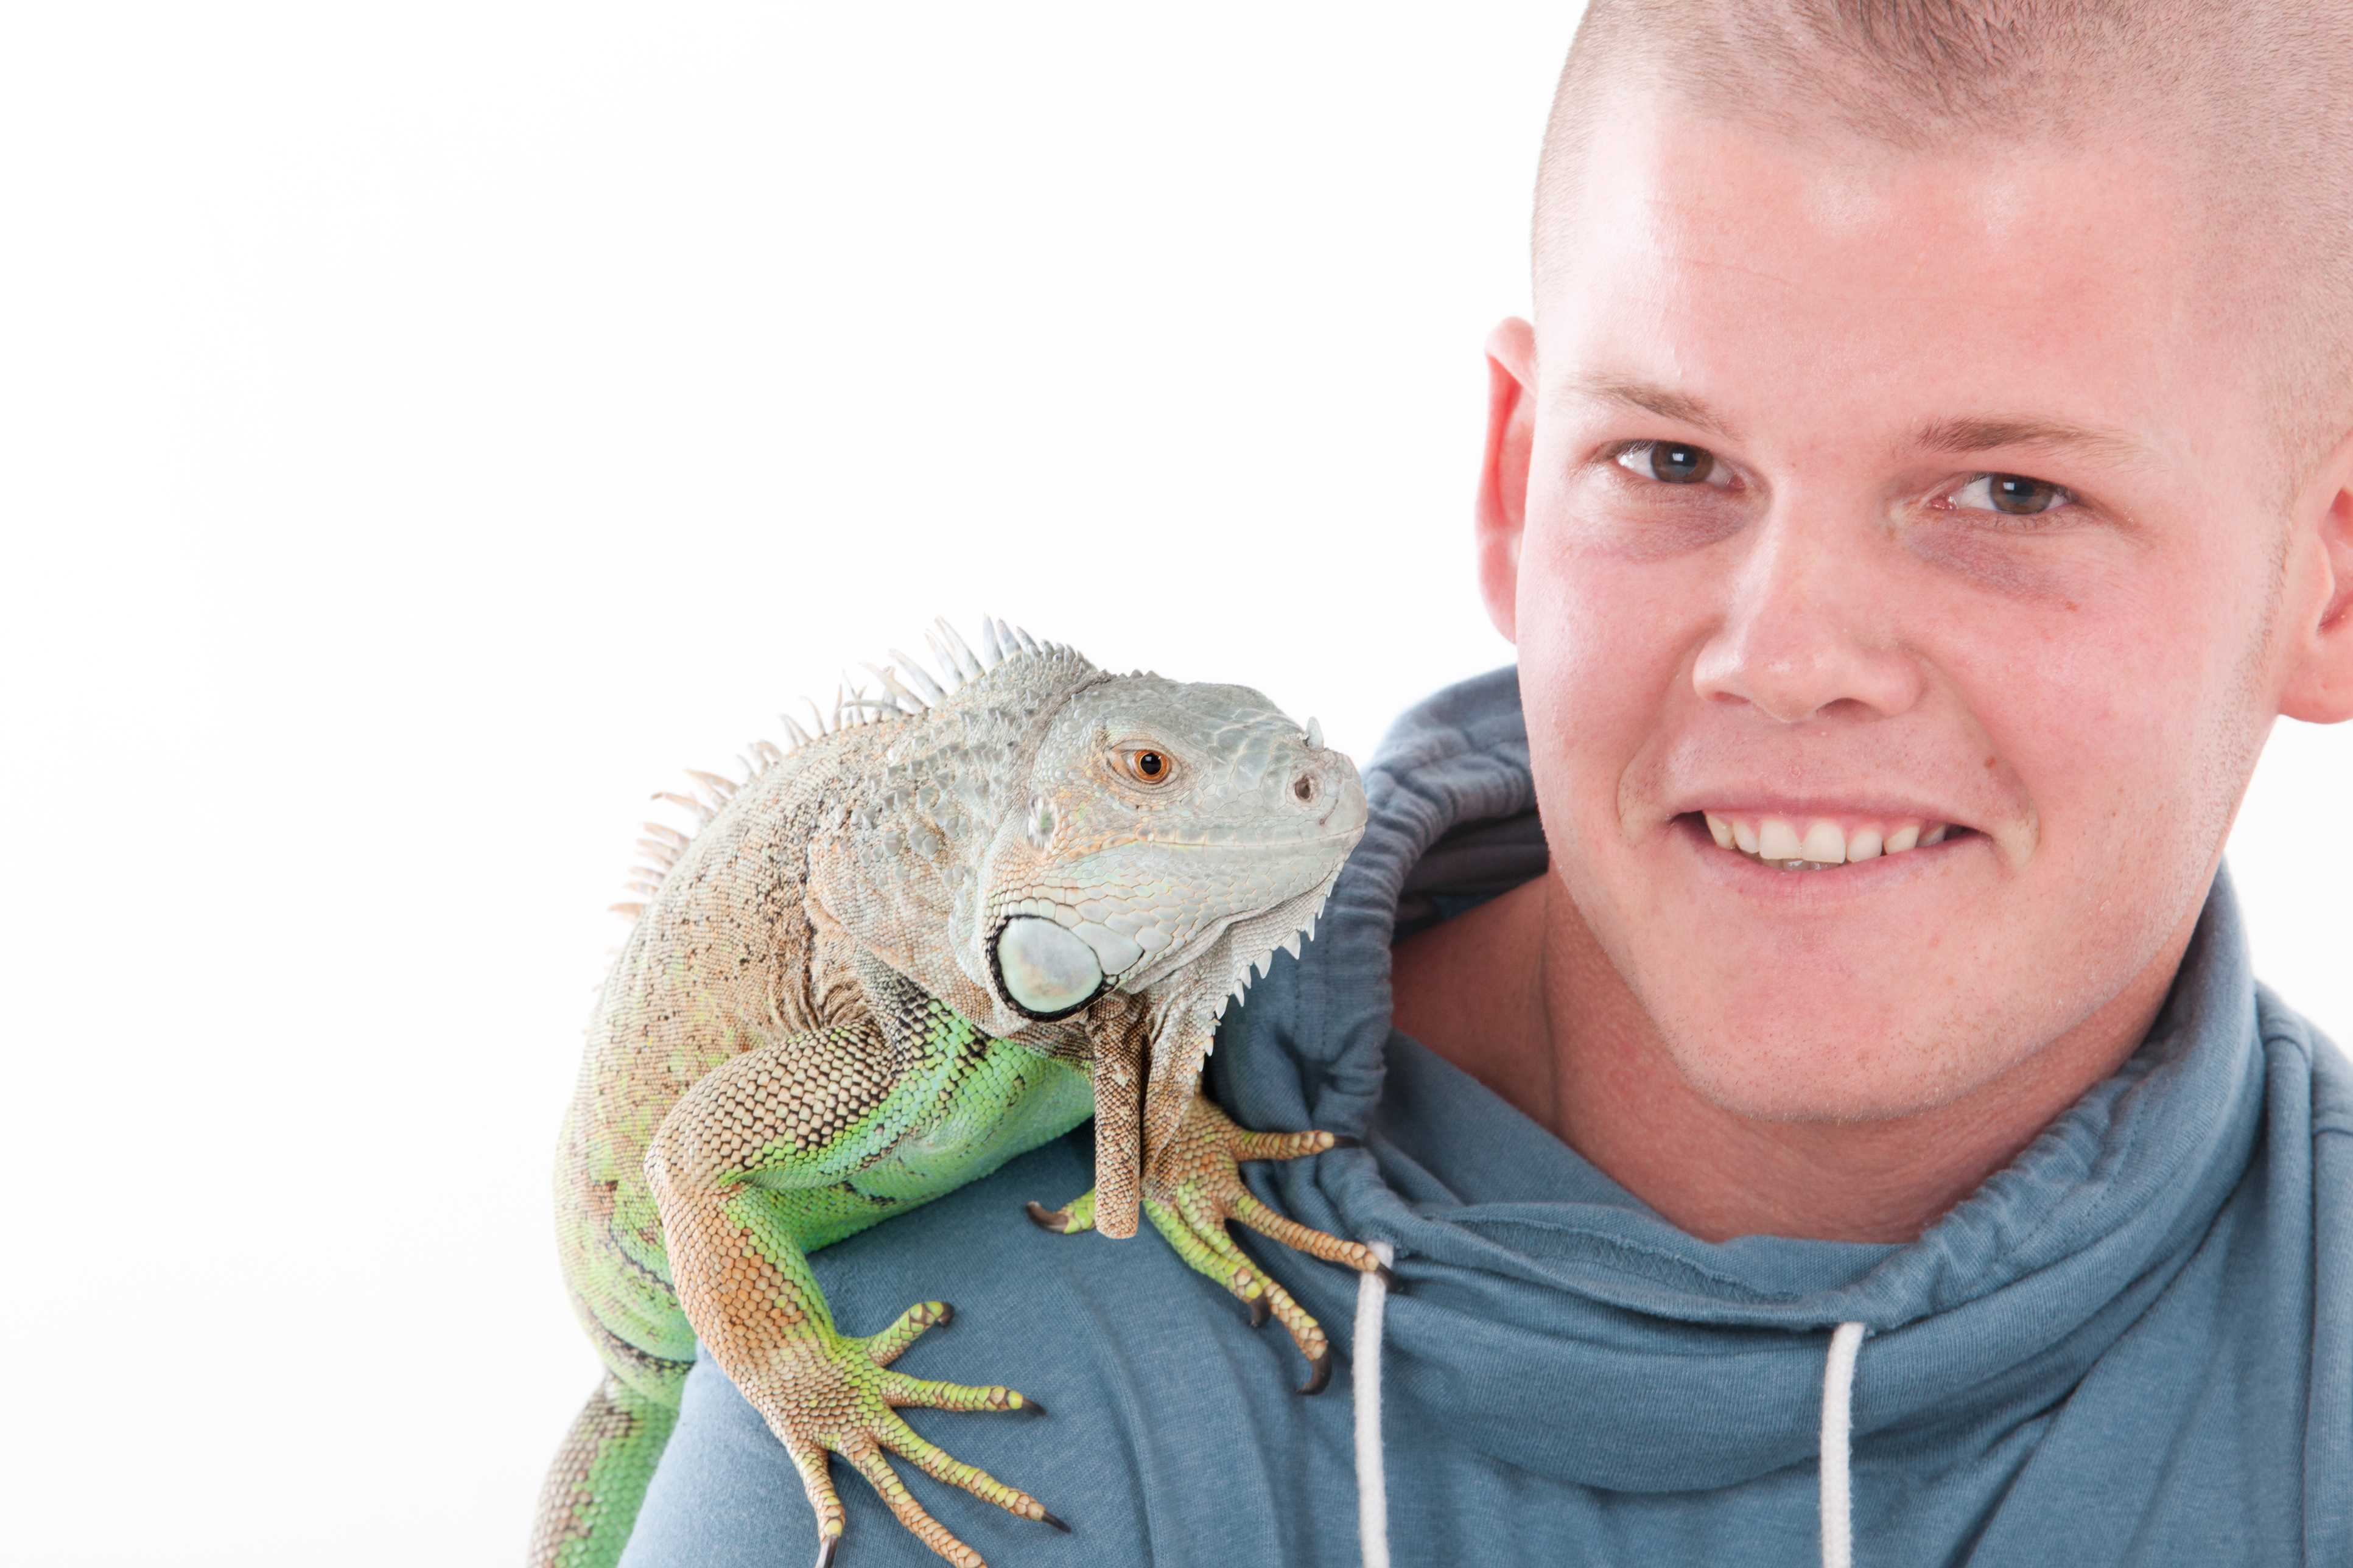 Boy with a large lizard on his shoulder